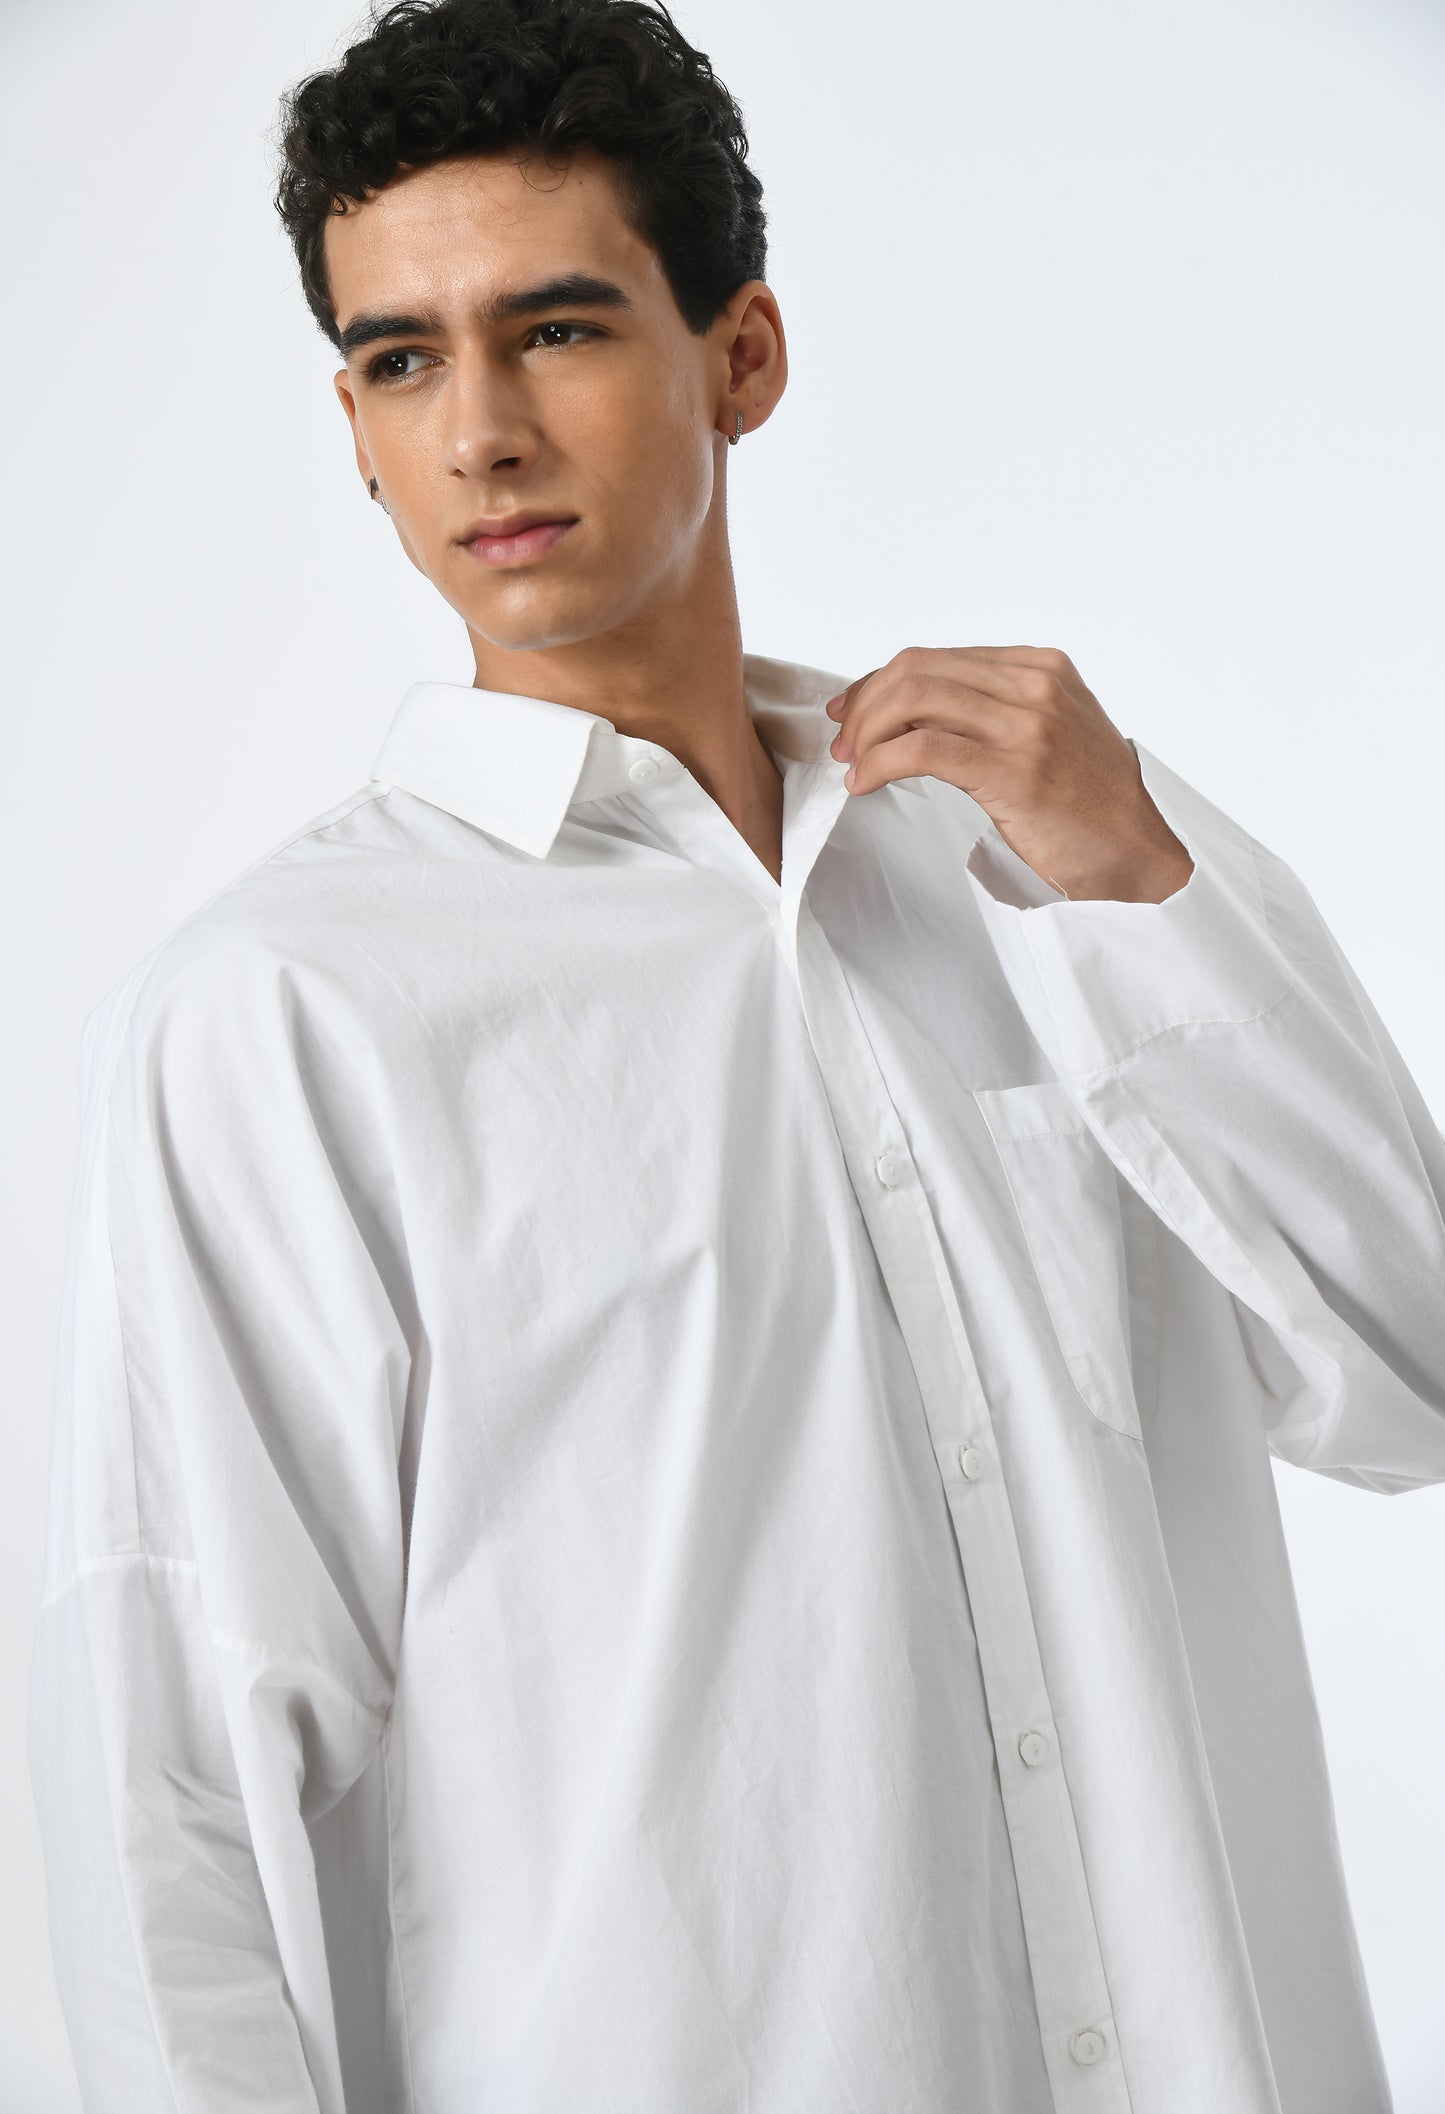 White unisex shirt with classic collar.